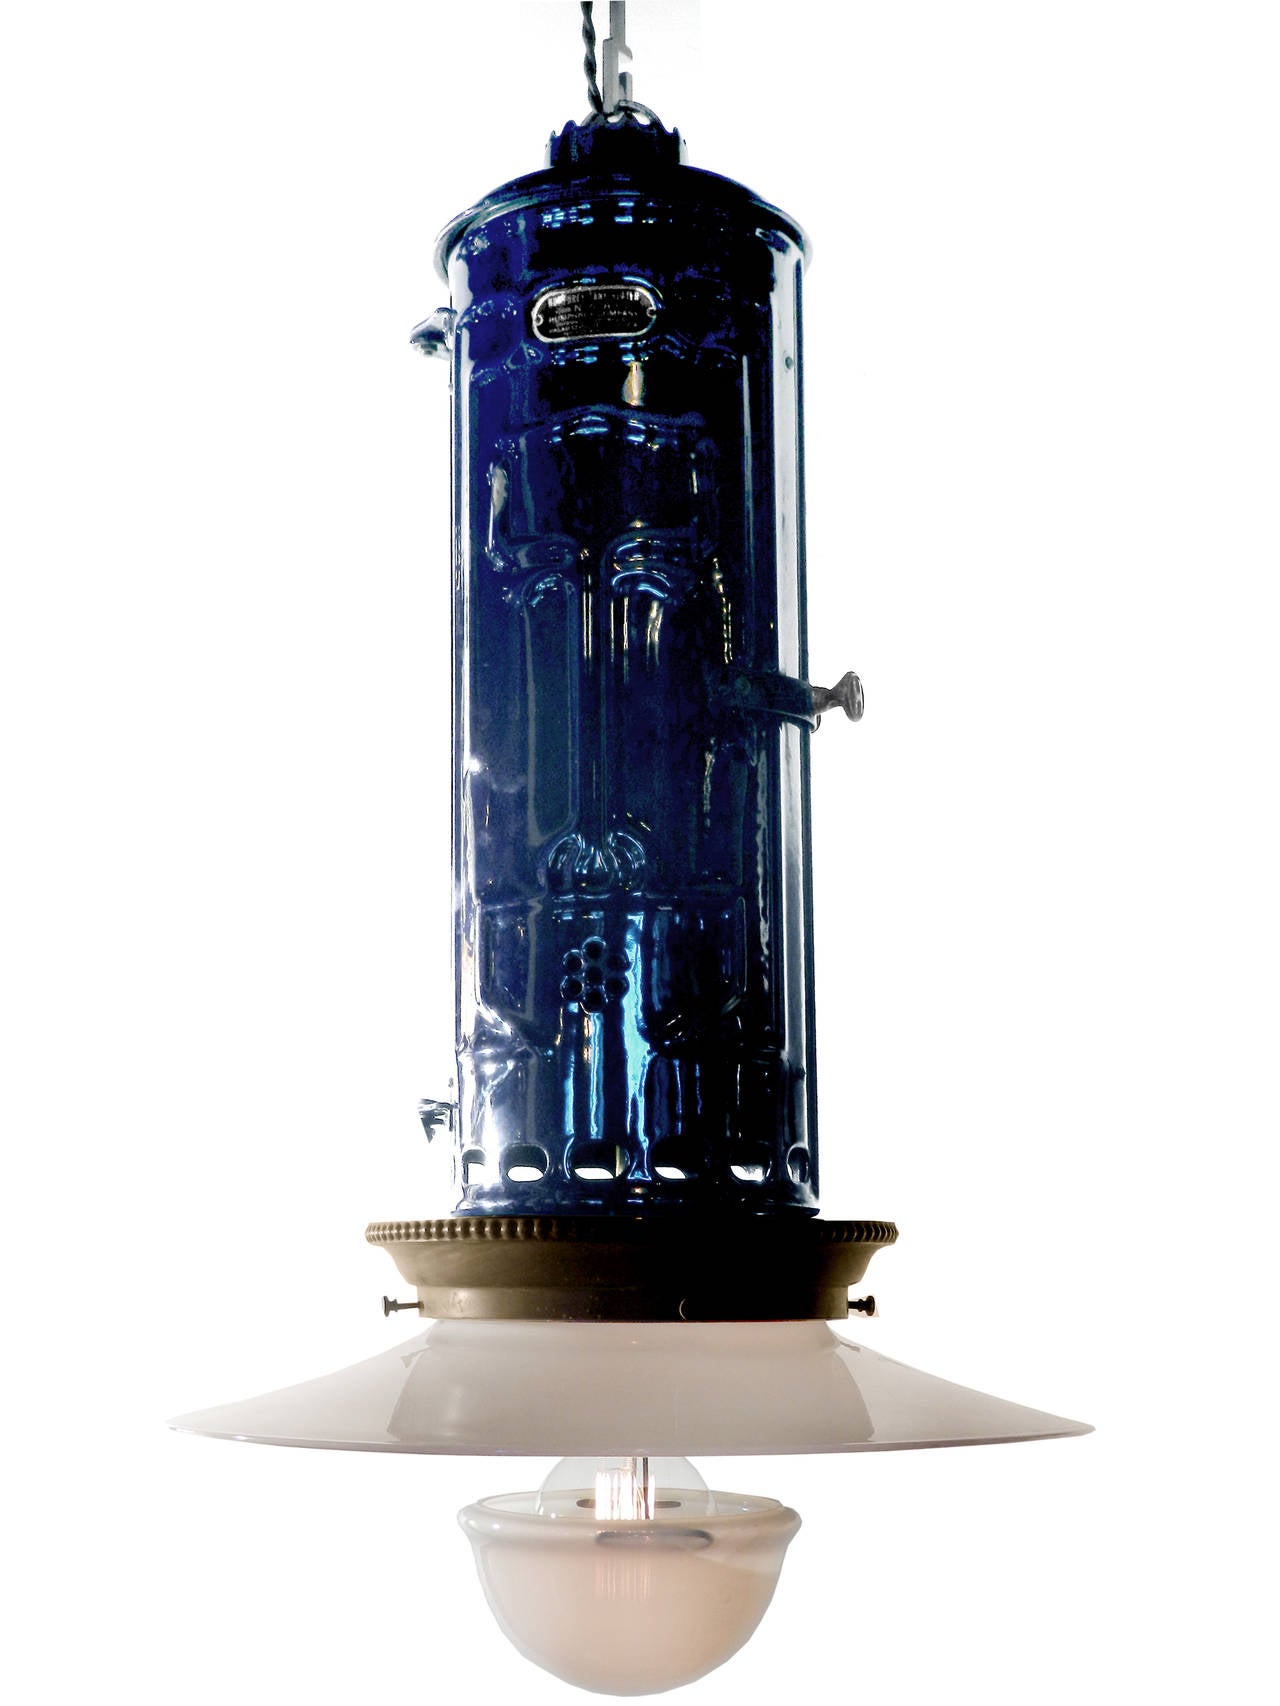 We got a bit crazy with these lamps and we're thrilled with the results.  One blue porcelain Humphery hot water heater is rare… imagine finding three. I believe these were made by Humphrey… The well known gas lamp company. This inspired us to to